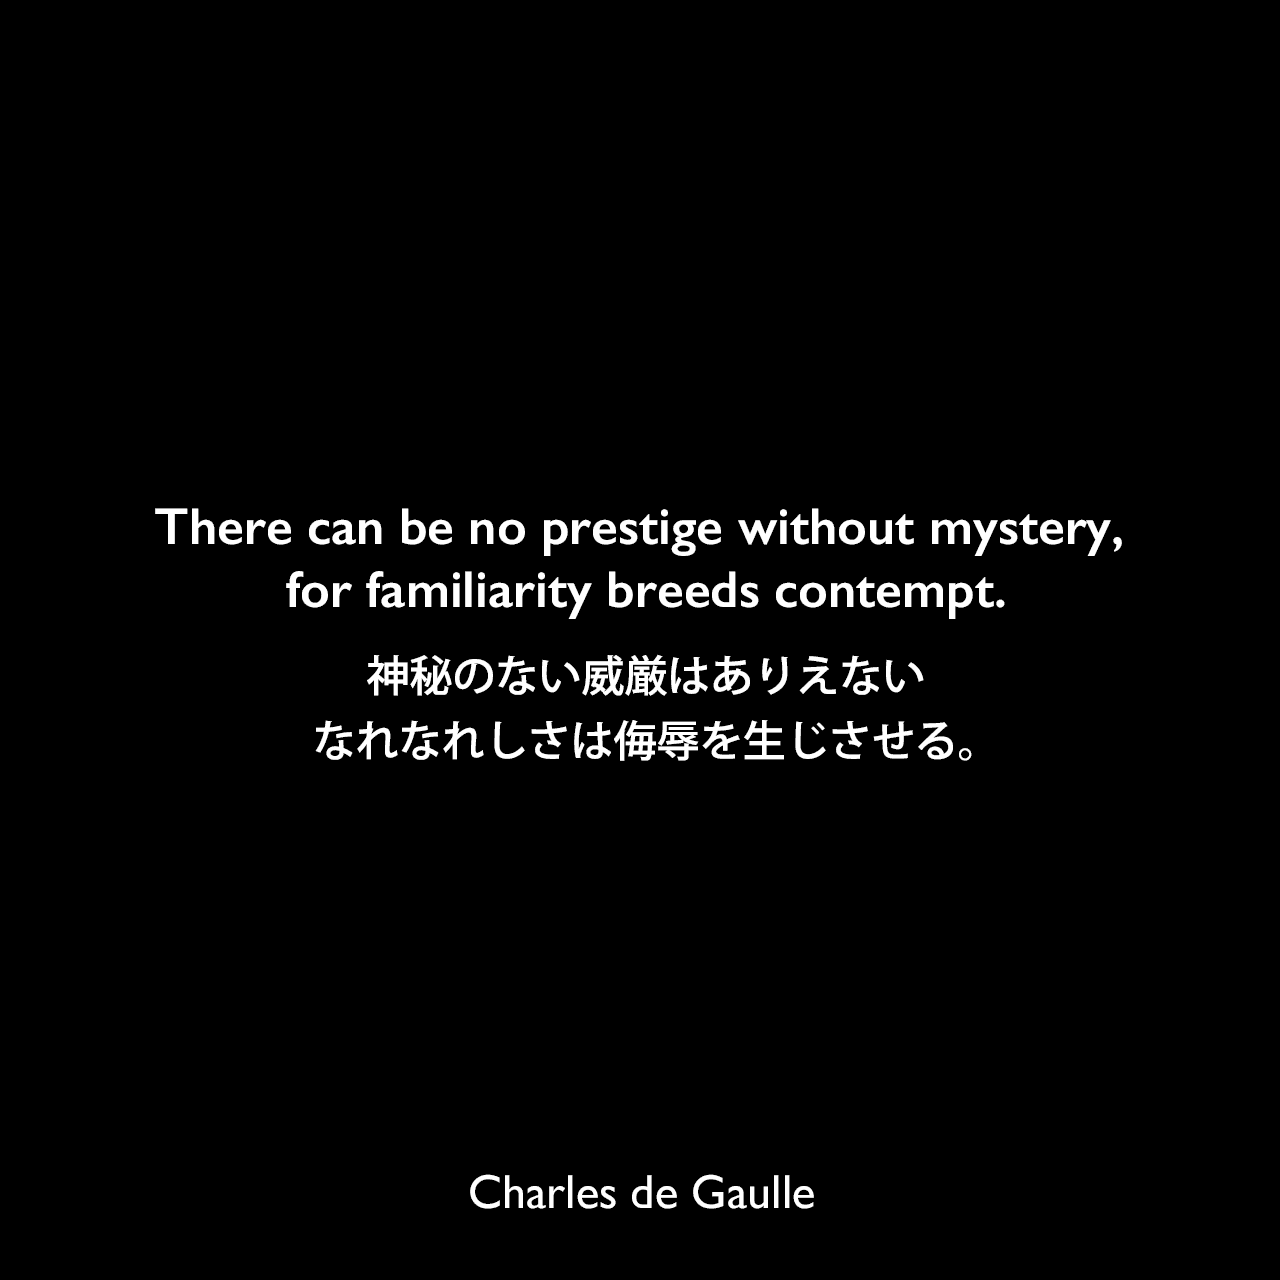 There can be no prestige without mystery, for familiarity breeds contempt.神秘のない威厳はありえない、なれなれしさは侮辱を生じさせる。Charles de Gaulle